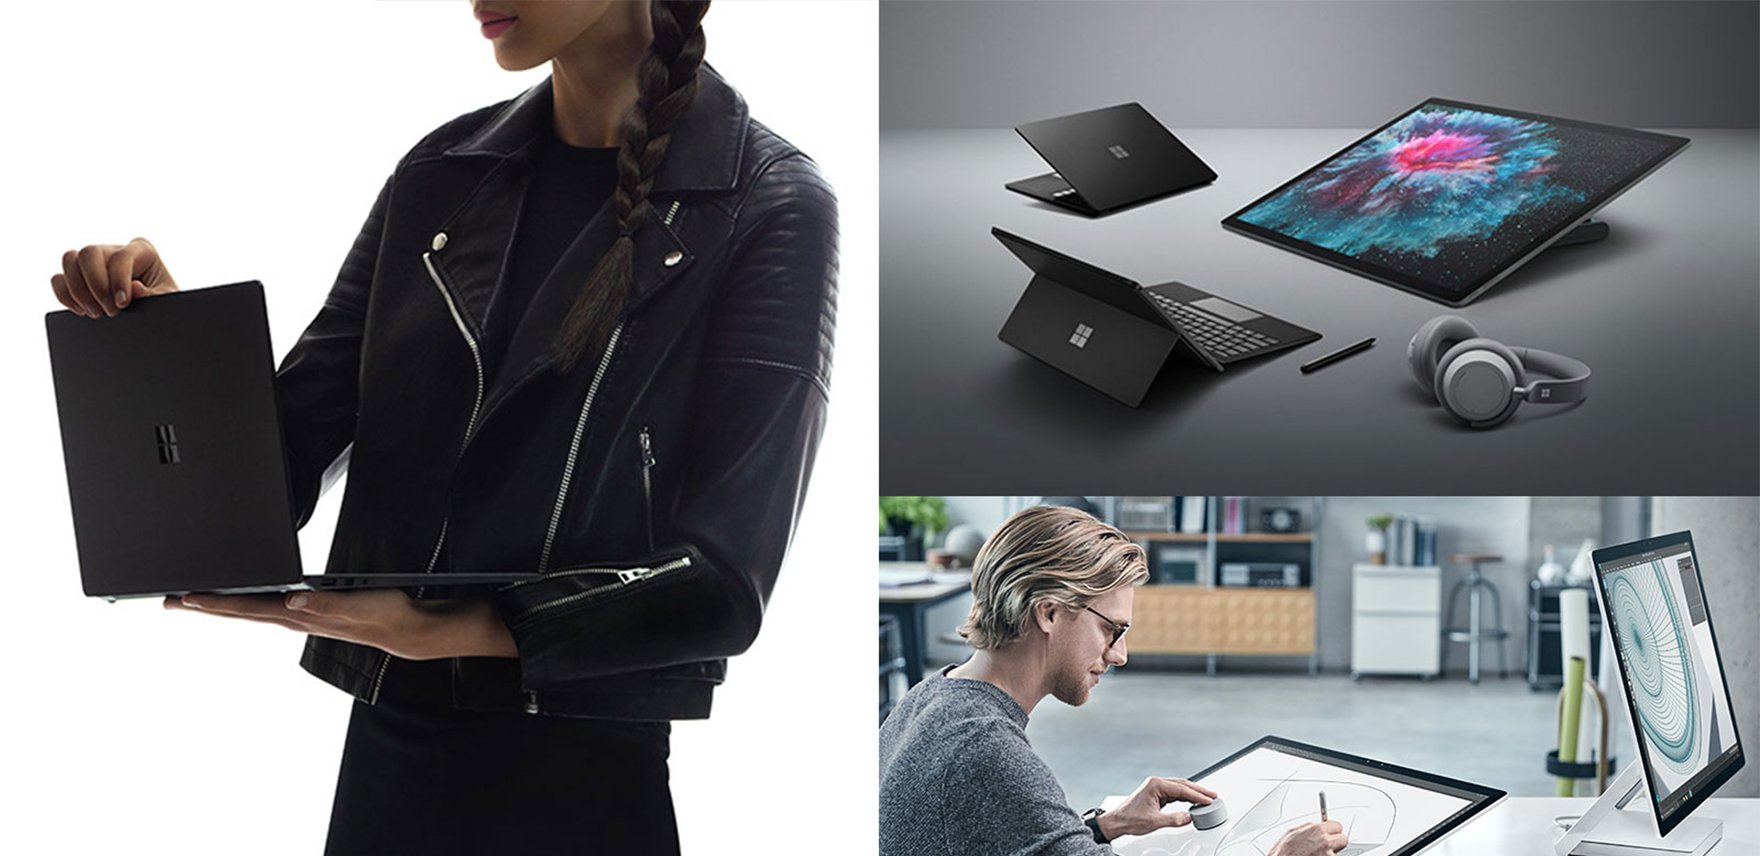 Empowering a new era of personal productivity with new Surface devices a4ff74c59aa5b23444e17e4fcb0308f6.jpg